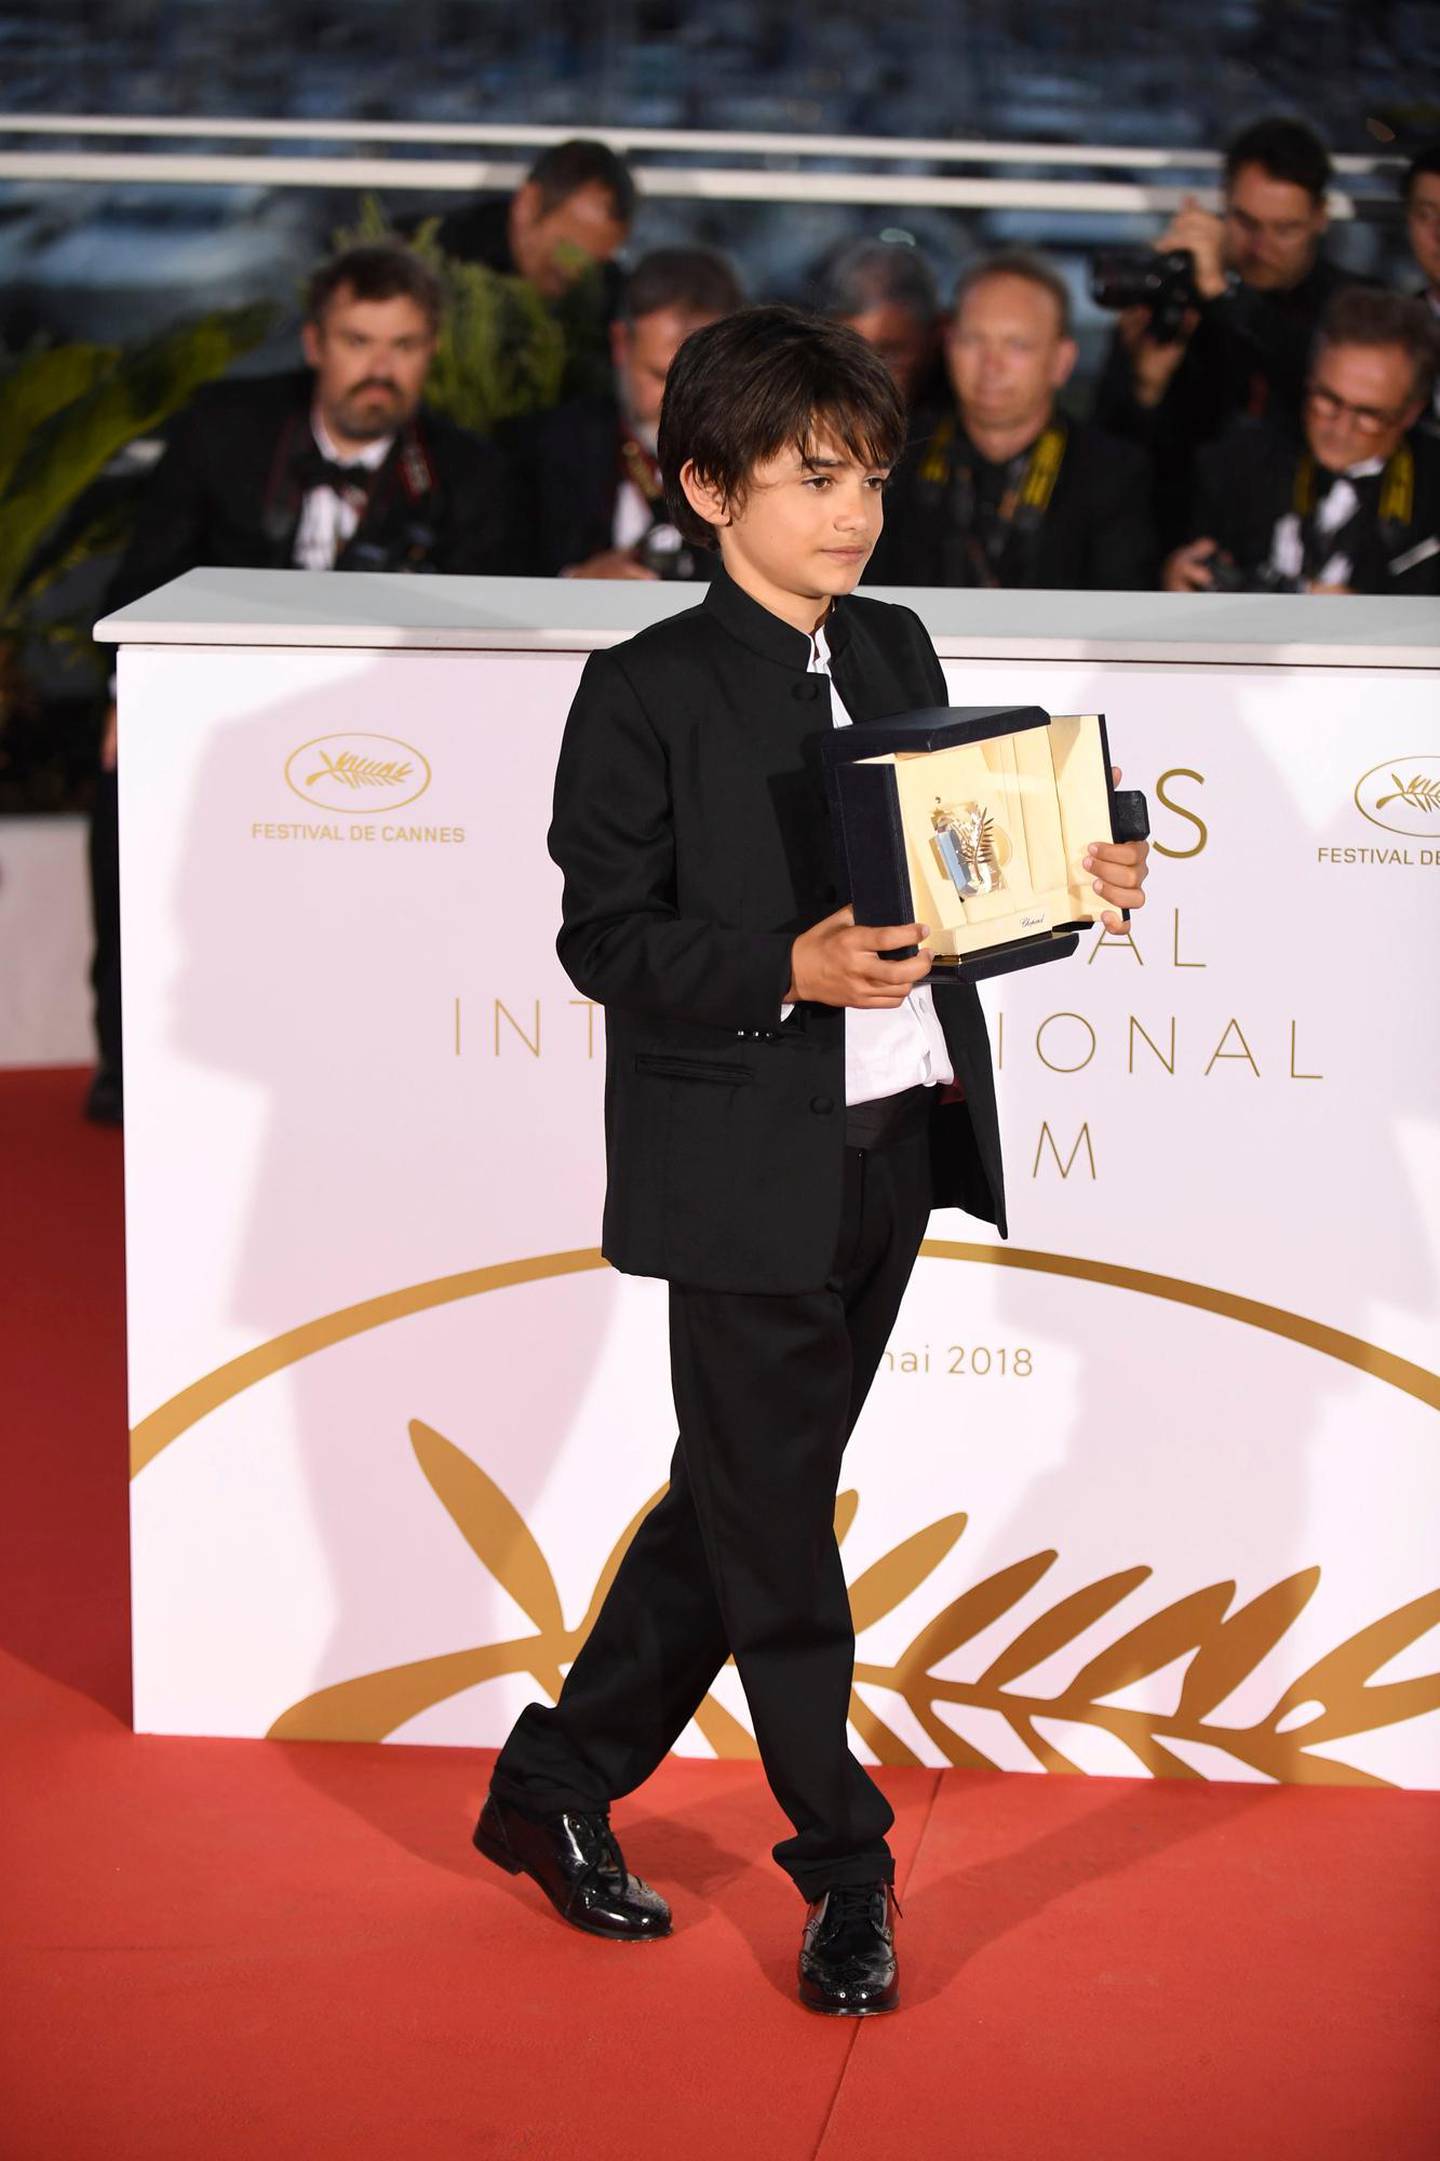 Actor Zain Al Rafeea poses during a photo call with the Jury Prize award for the film 'Capharnaum' following the awards ceremony at the 71st international film festival, Cannes, southern France, Saturday, May 19, 2018. (Photo by Arthur Mola/Invision/AP)